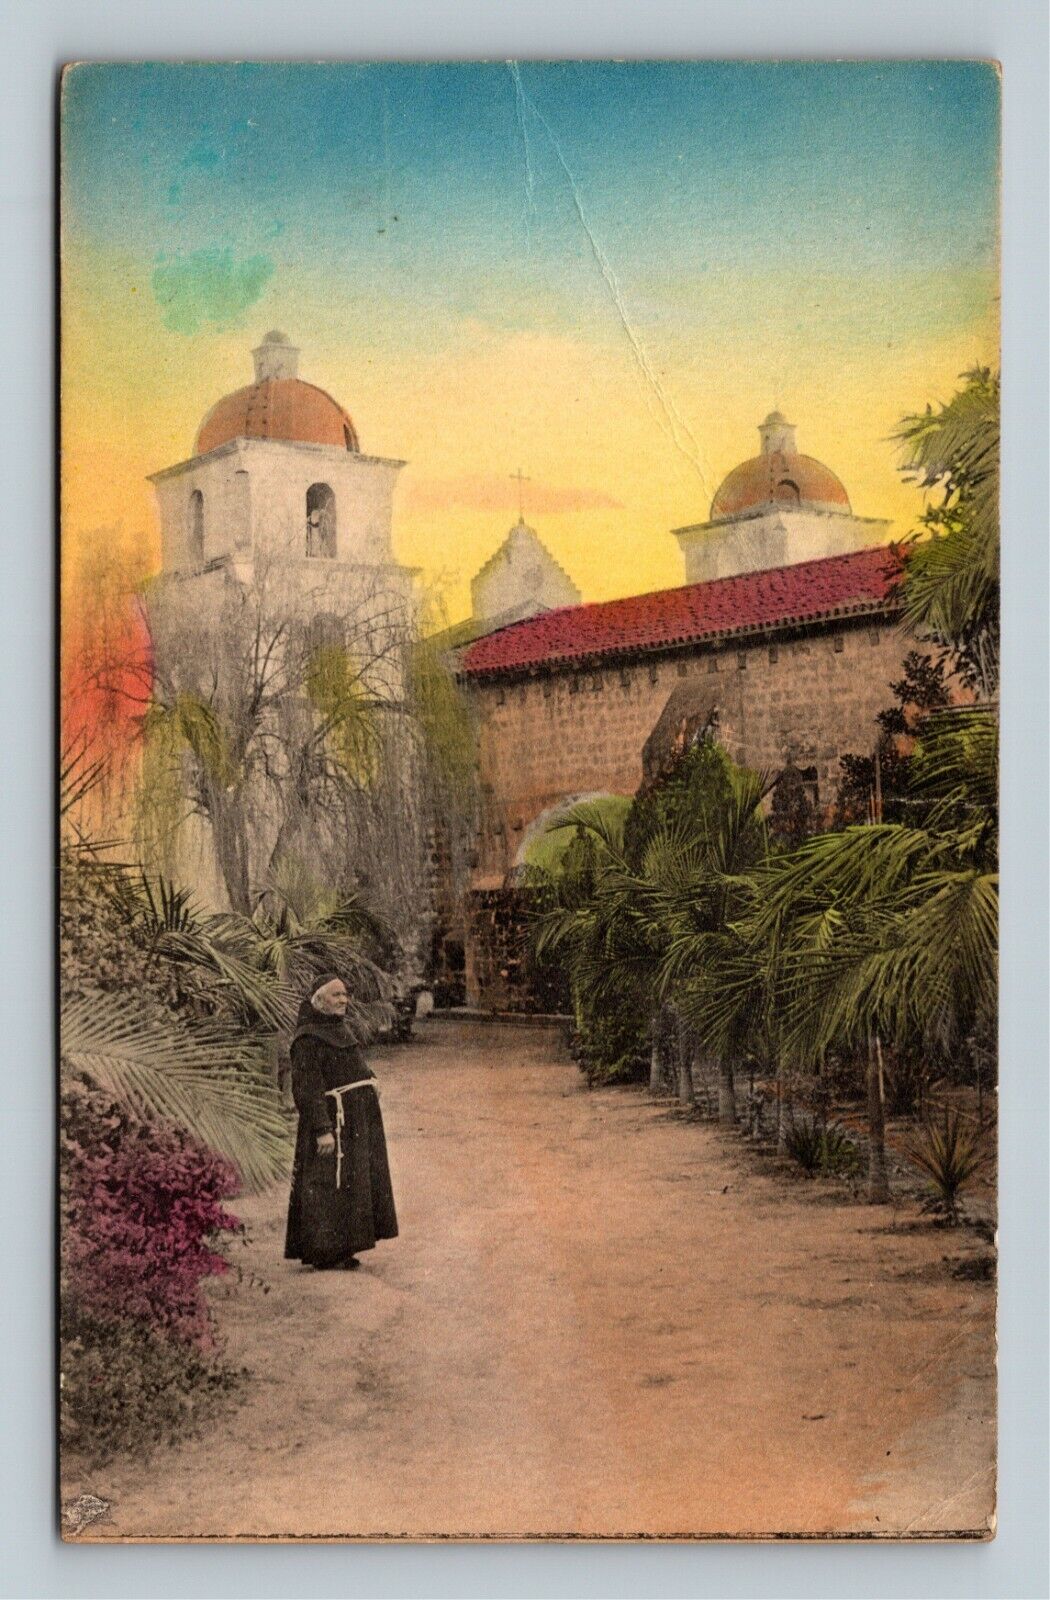 Padre Admiring The Mission Garden, Bell Tower, California c1937 Vintage Postcard